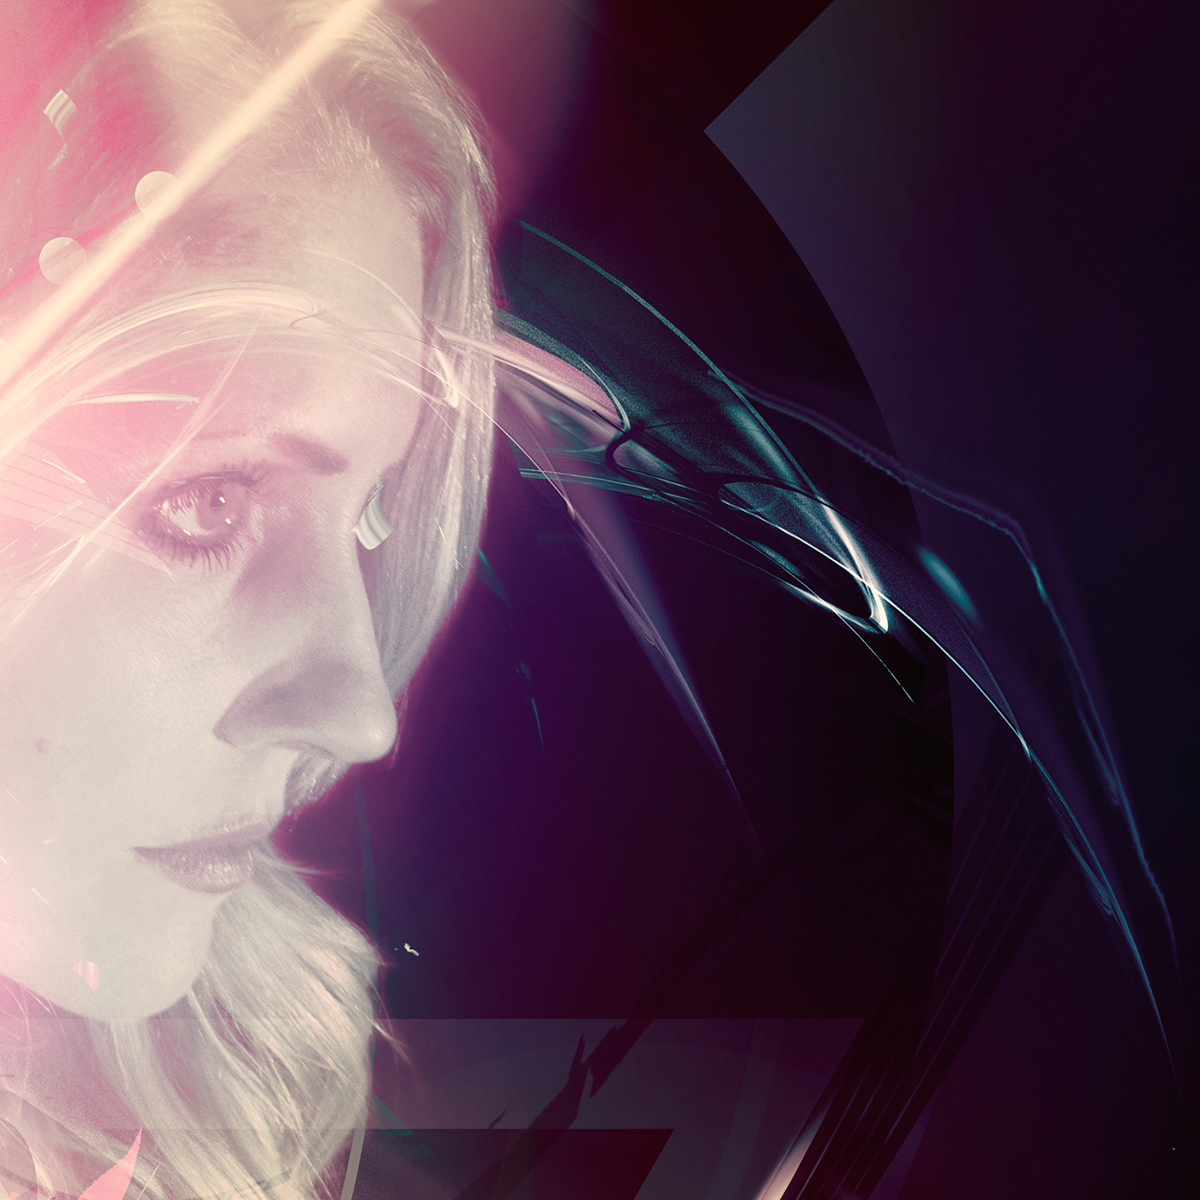 abstract precurser endeffect female face adobe photoshop photomanipulation chaos Triangles circles purple blue pink